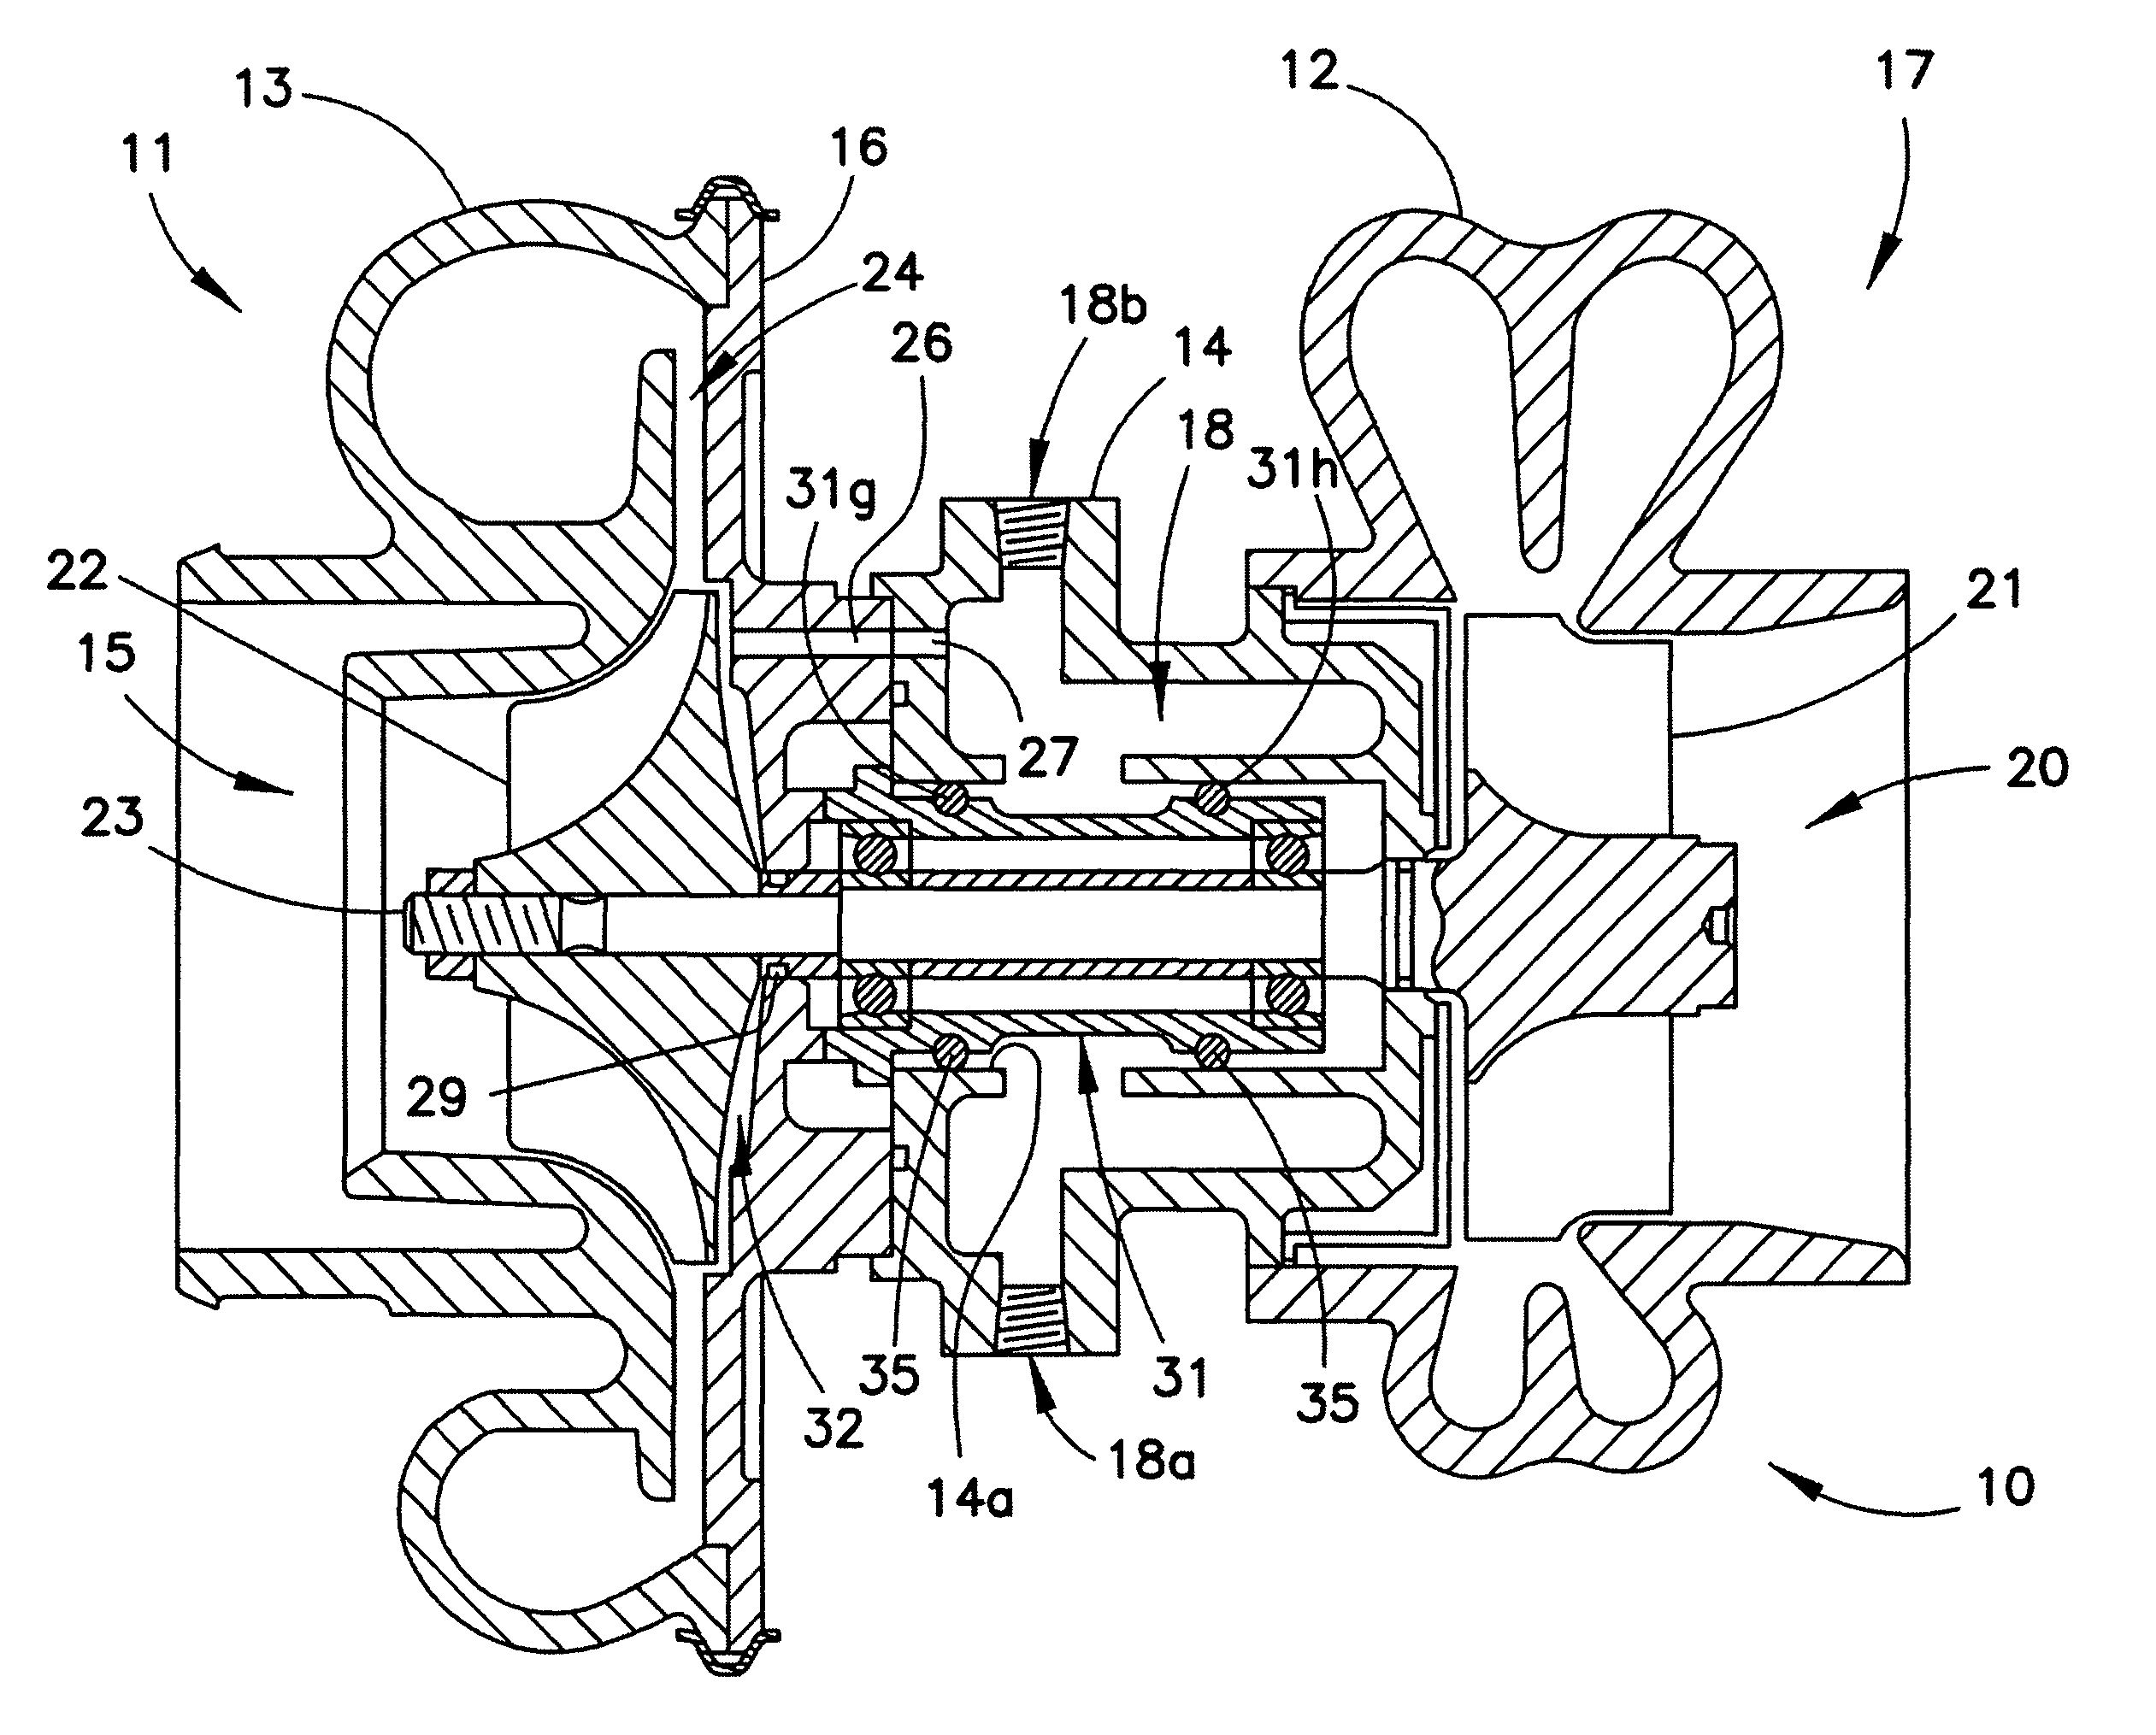 Air-cooled turbocharger with optional internal pressure relief valve